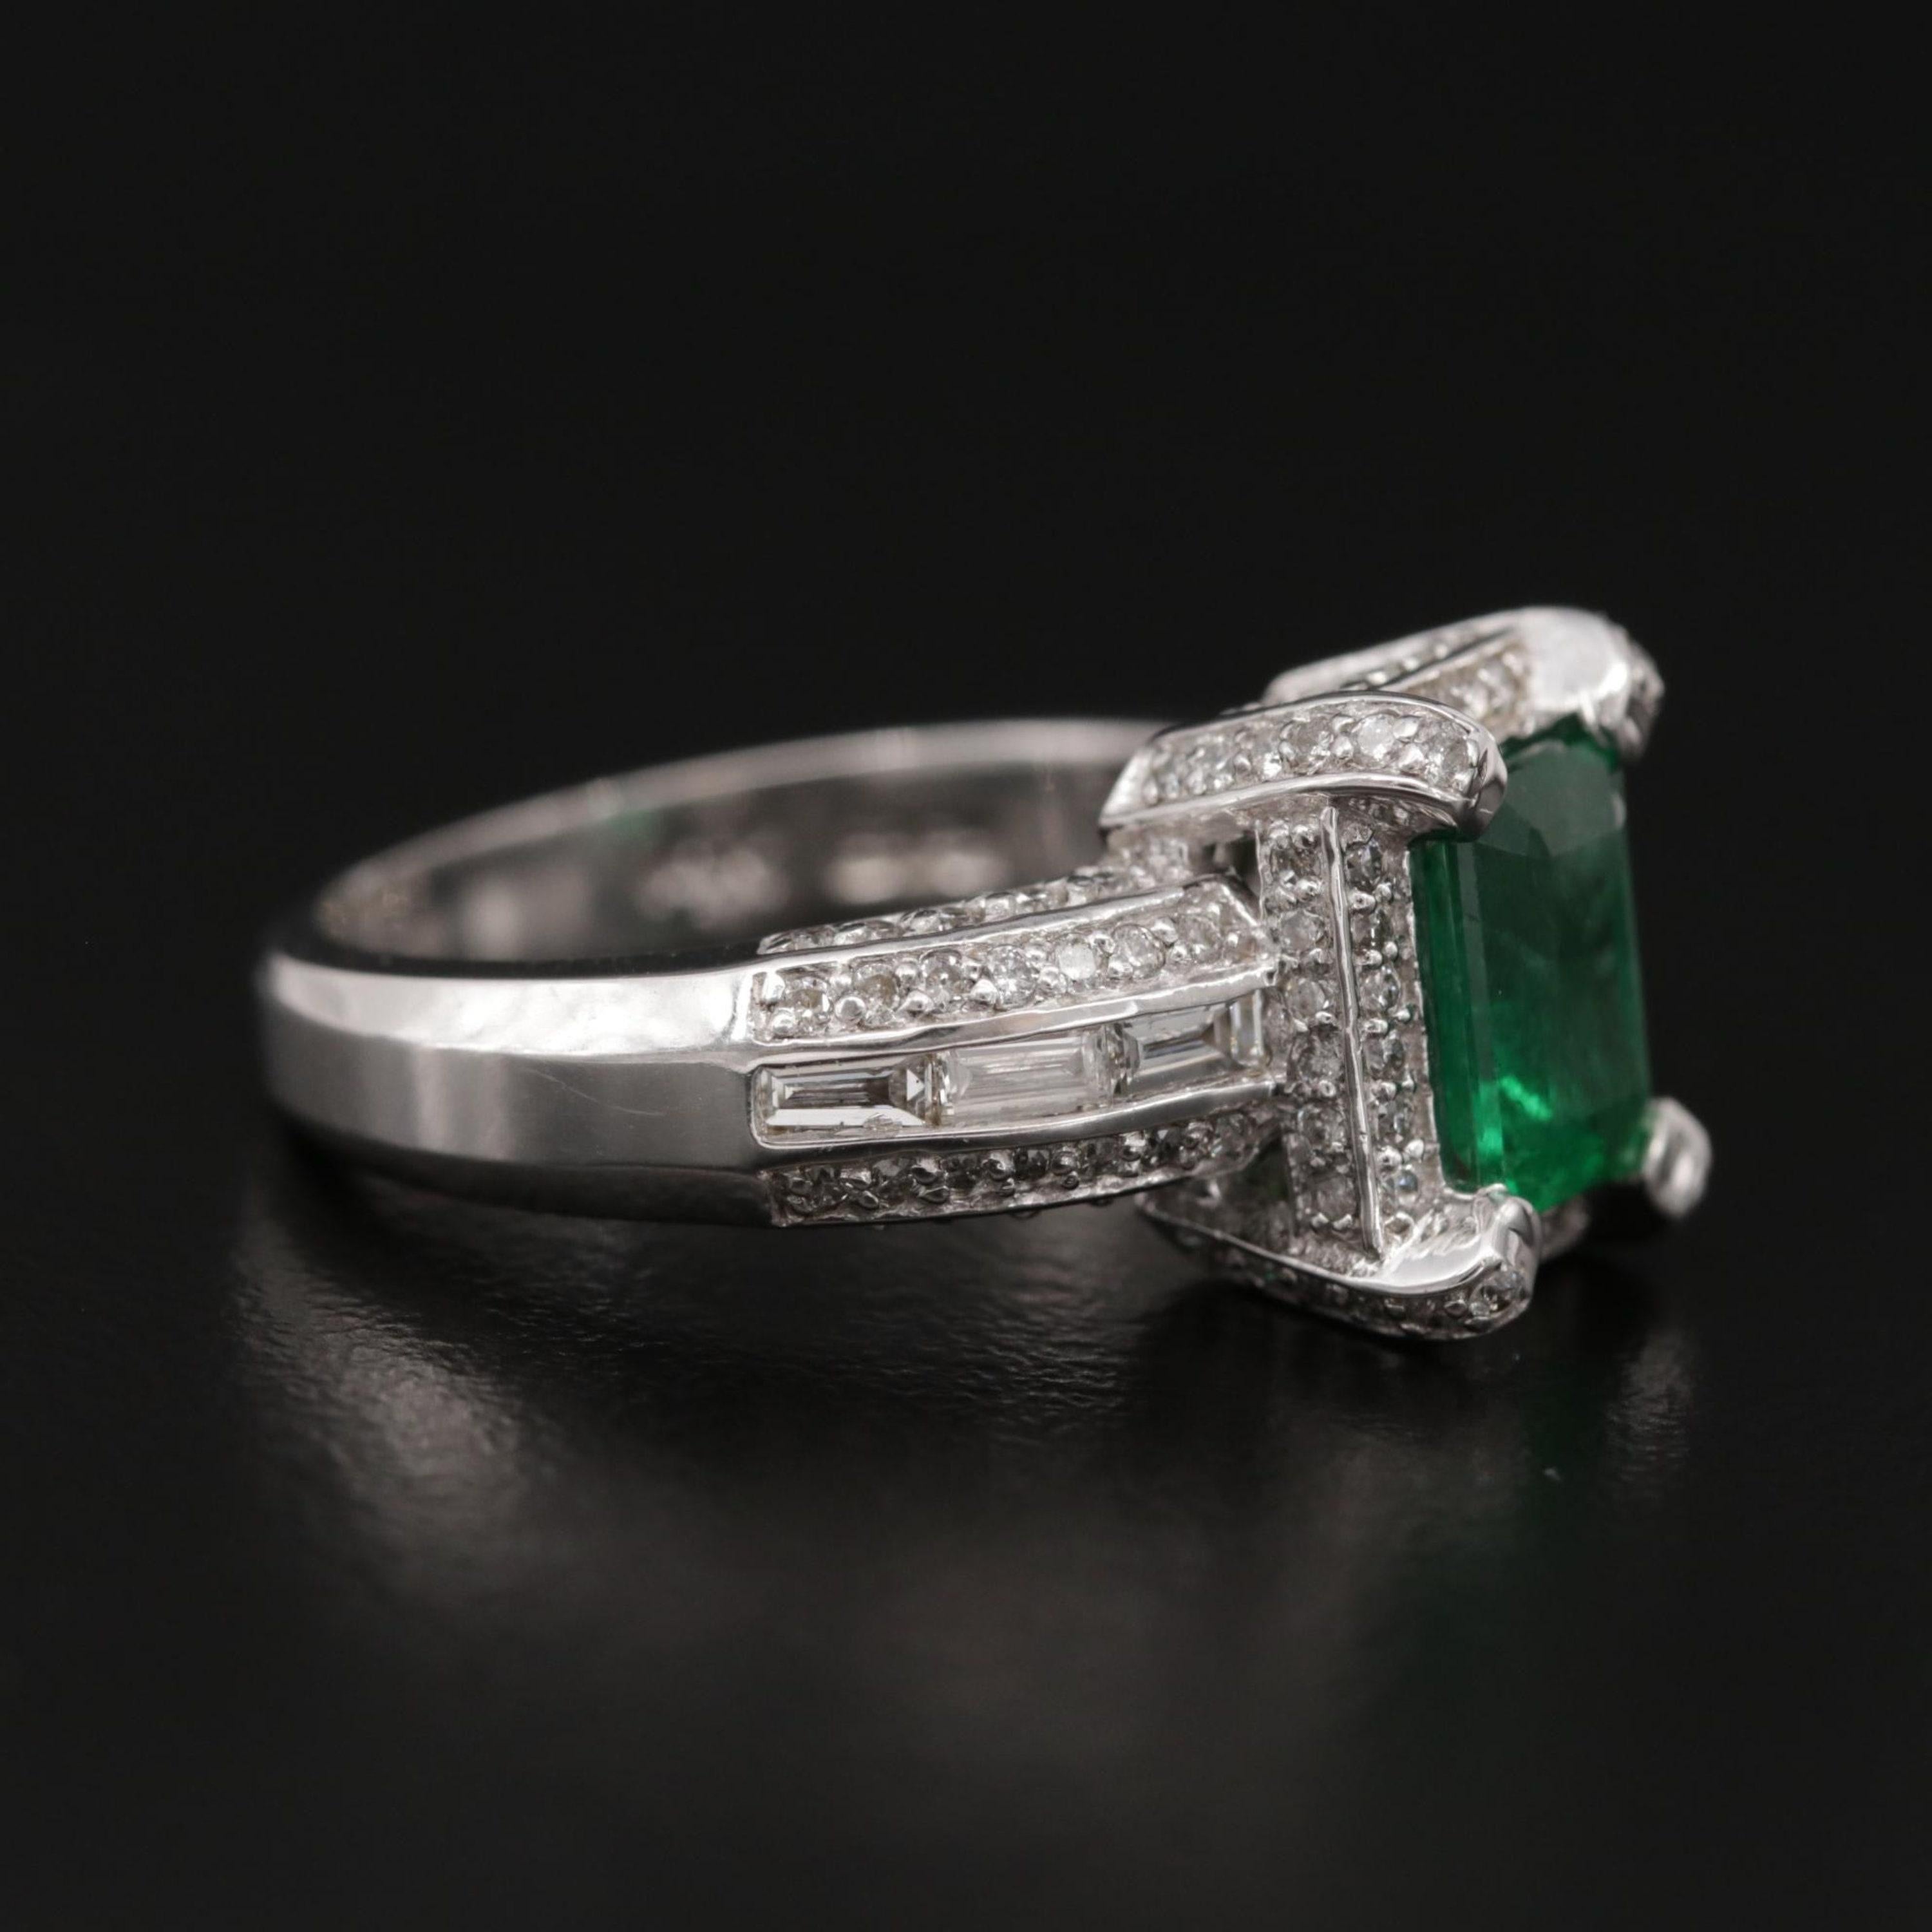 For Sale:  3 Carat Natural Emerald Engagement Ring, White Gold Halo Diamond Wedding Ring 3